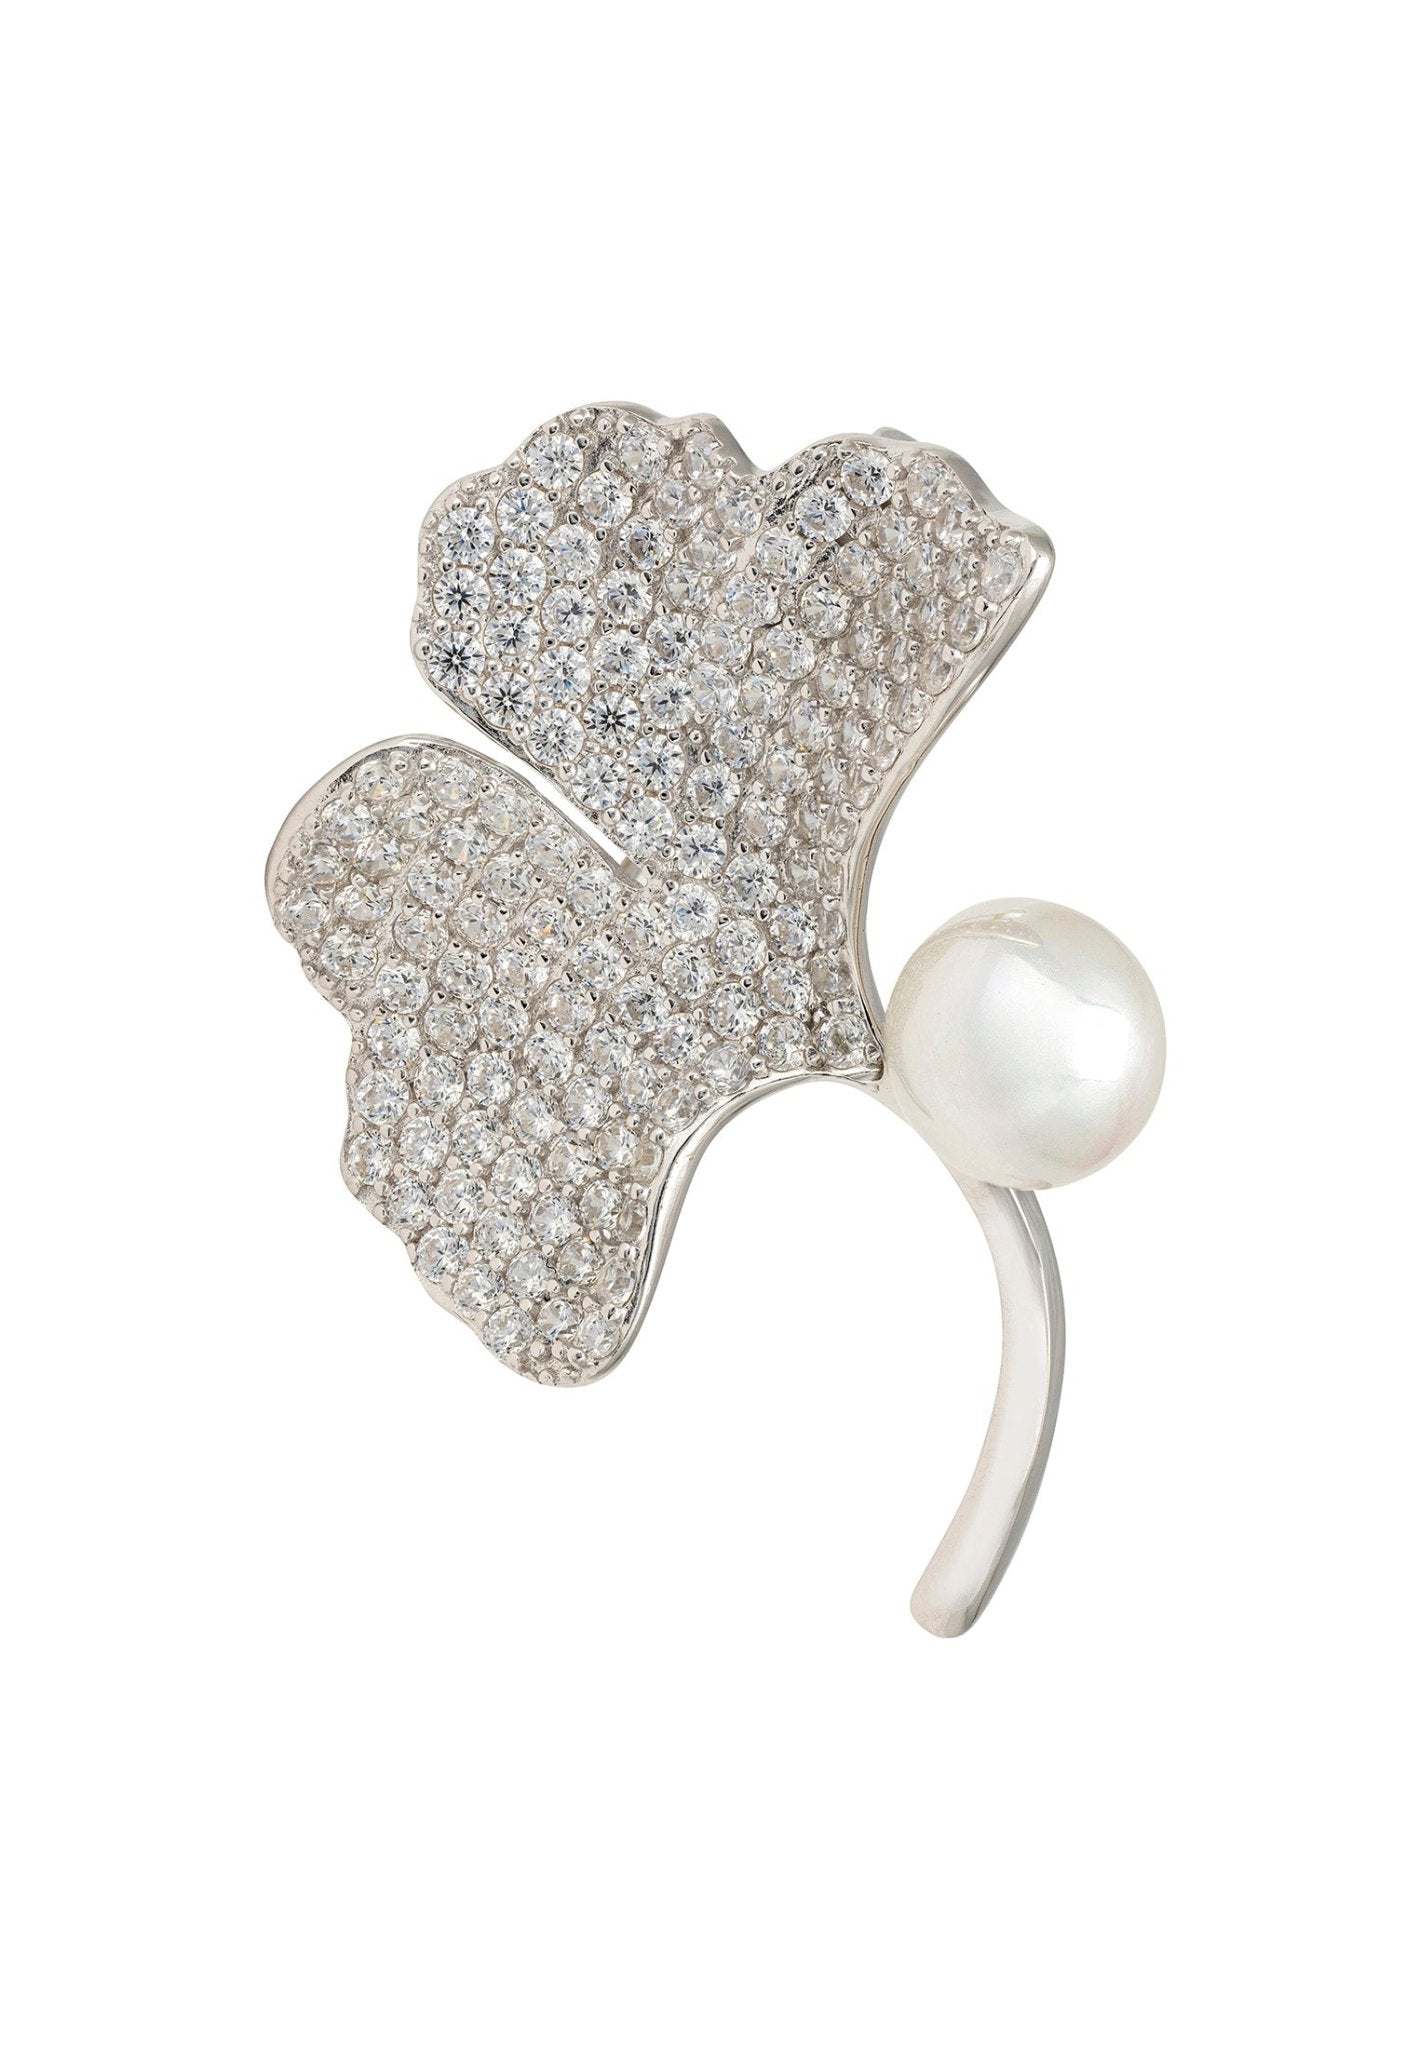 Ginkgo Leaf And Pearl Brooch Silver - LATELITA Brooches